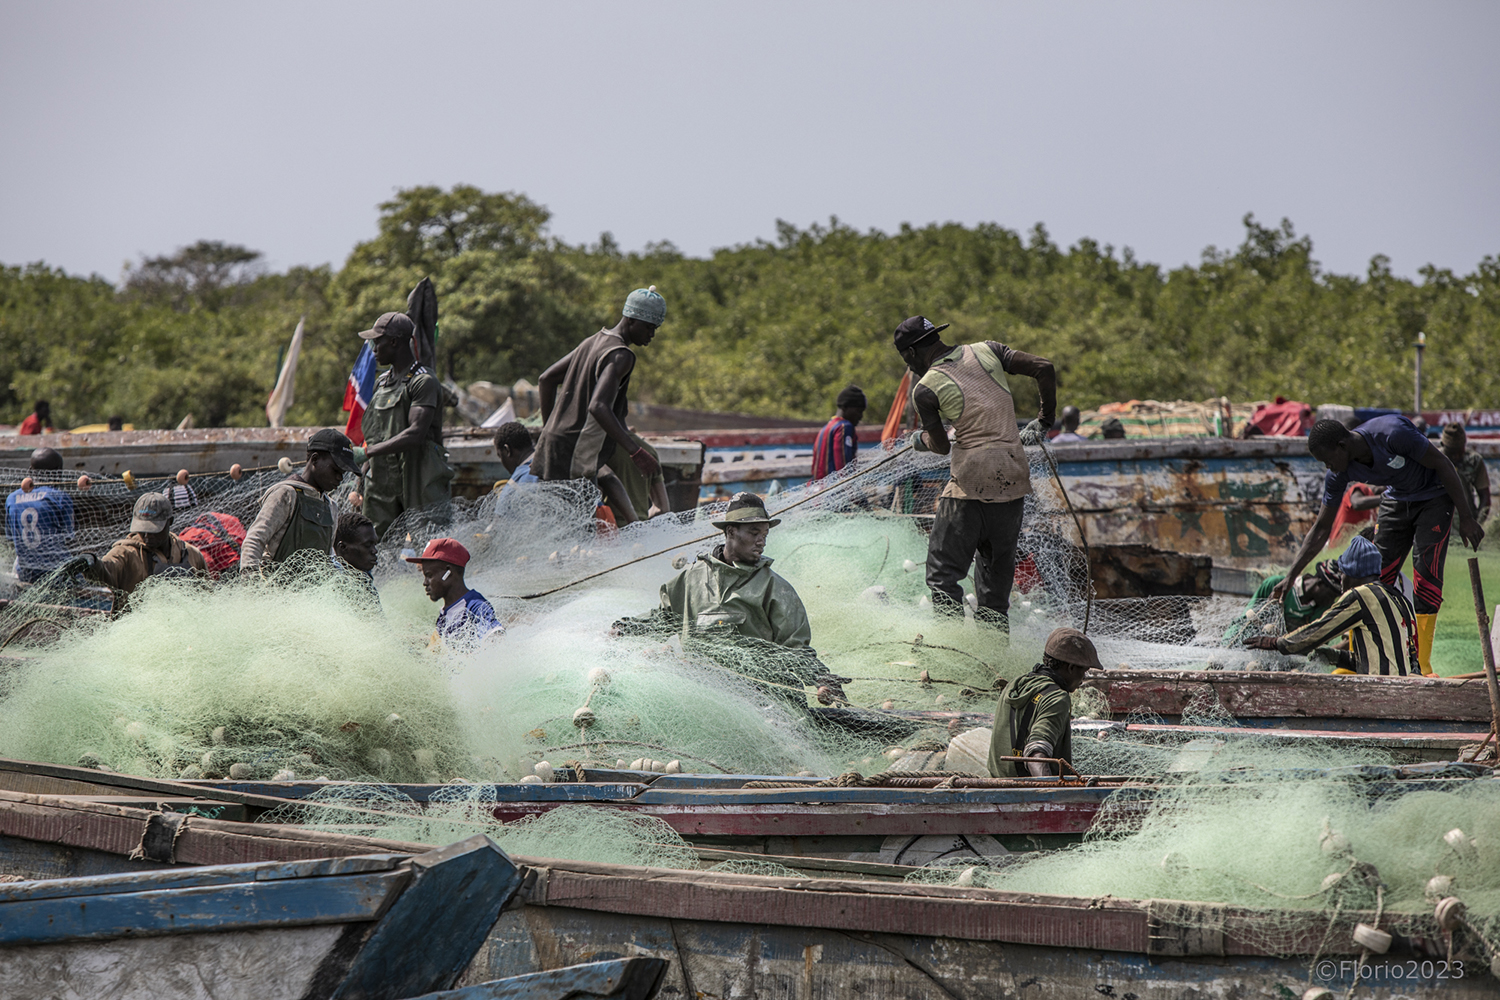 Fishermen working on their nets on fishing boats ( pirogues), The Gambia, West Africa. Image ©Jason Florio